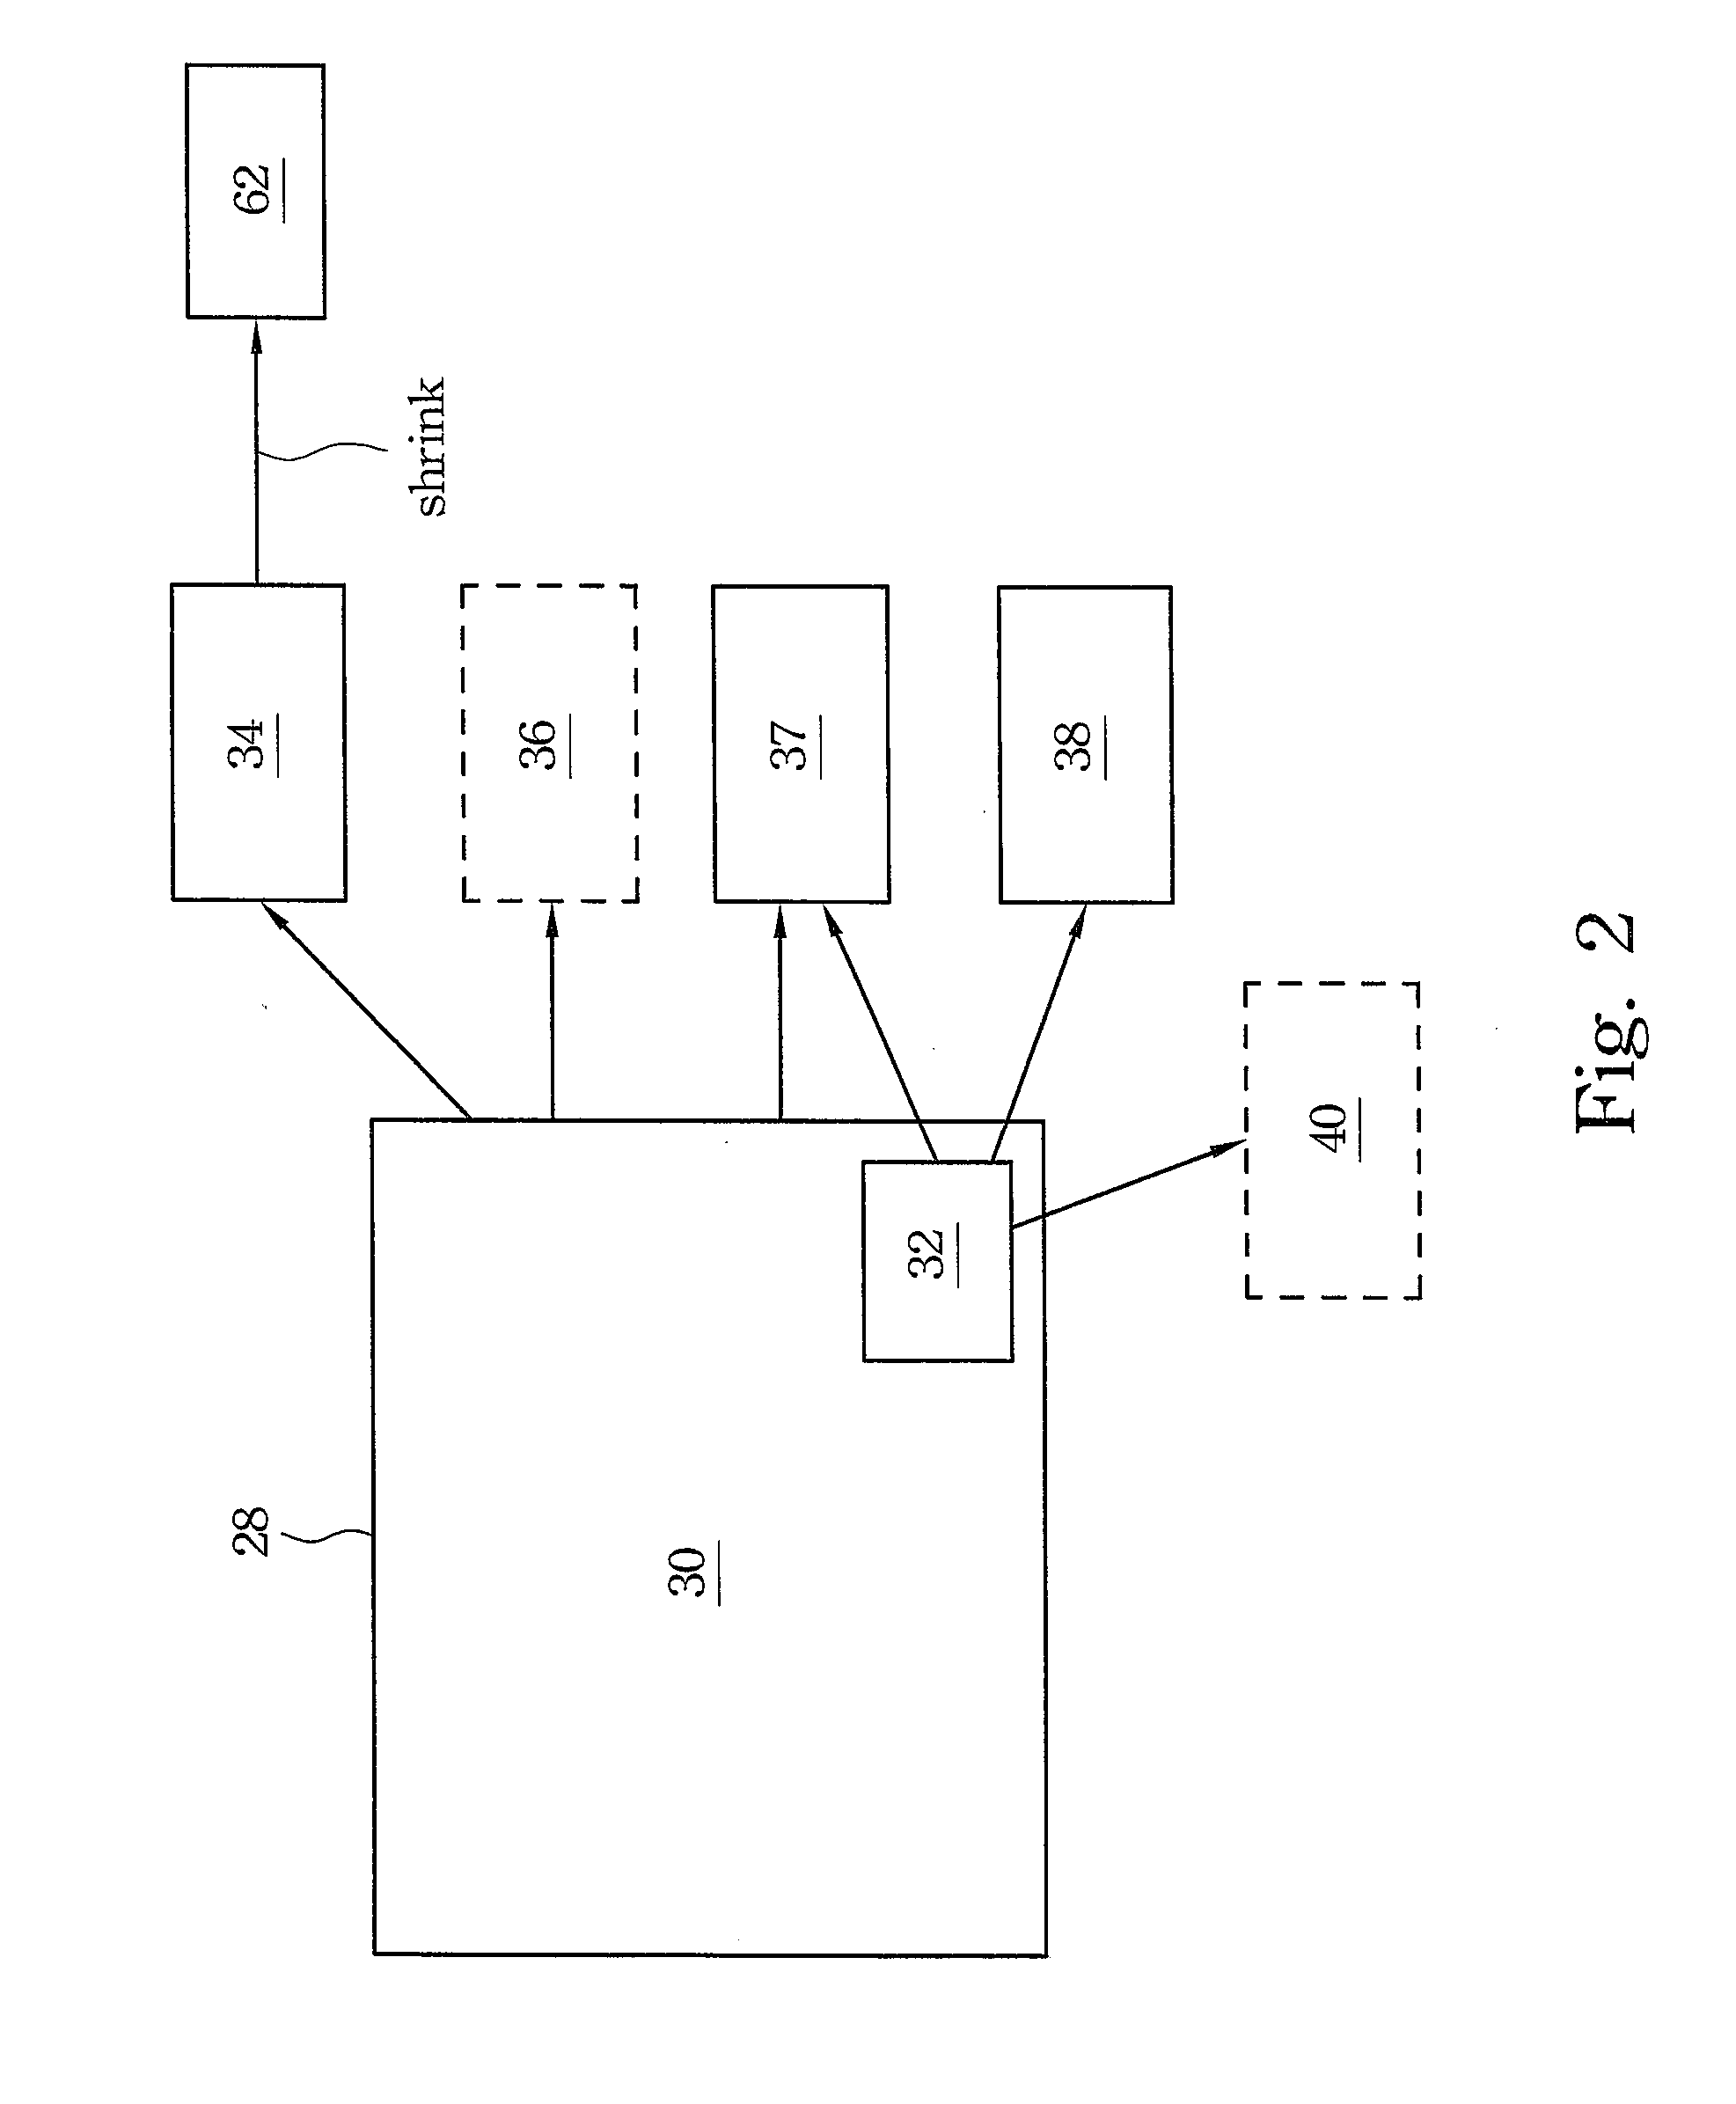 Design flow for shrinking circuits having non-shrinkable IP layout